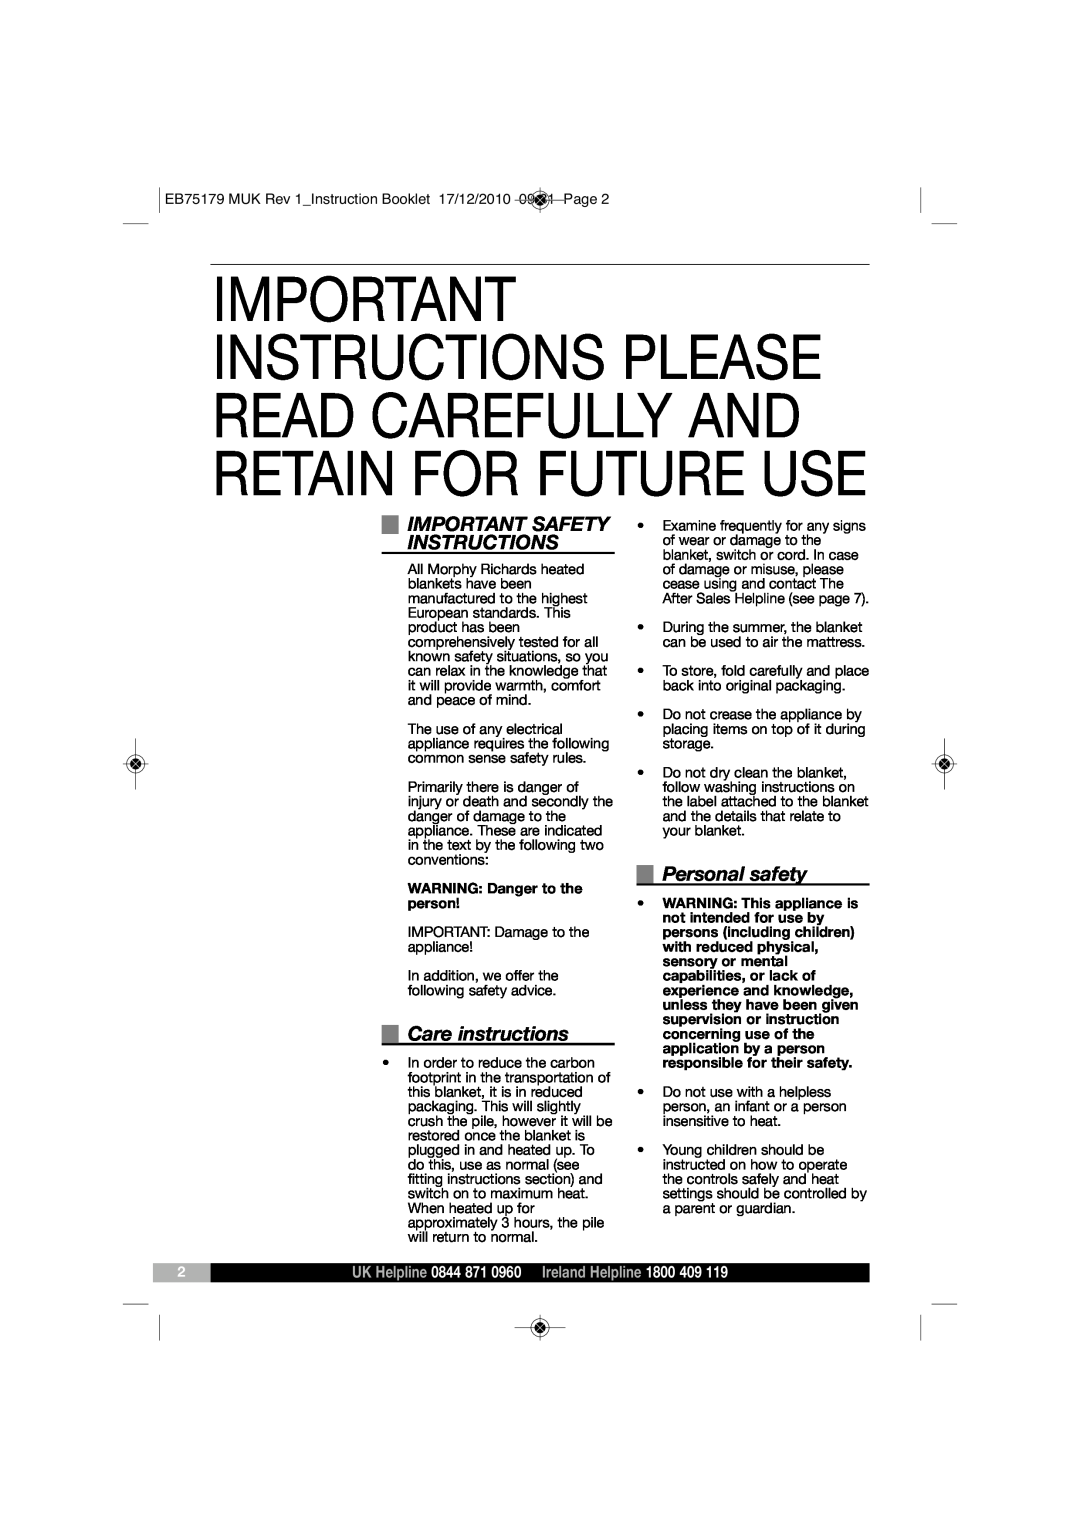 Morphy Richards EB75179 manual Important Safety Instructions, Care instructions, Personal safety 